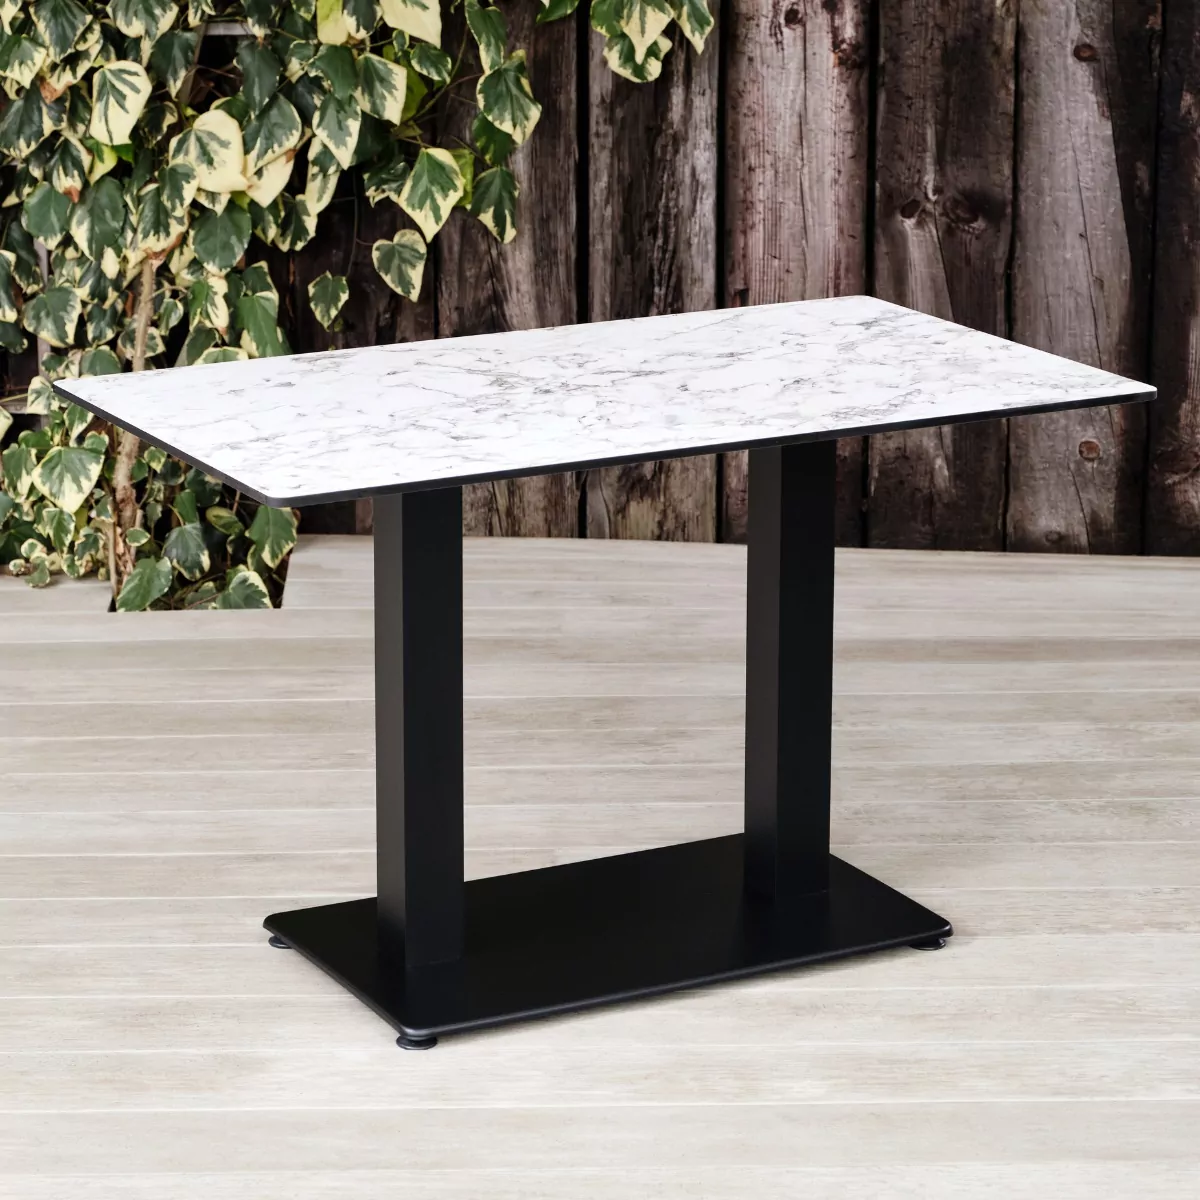 White Marble Rockingham Rectangular Pedestal Table with Rectangular Base. Suitable for Indoor & Outdoor Use.